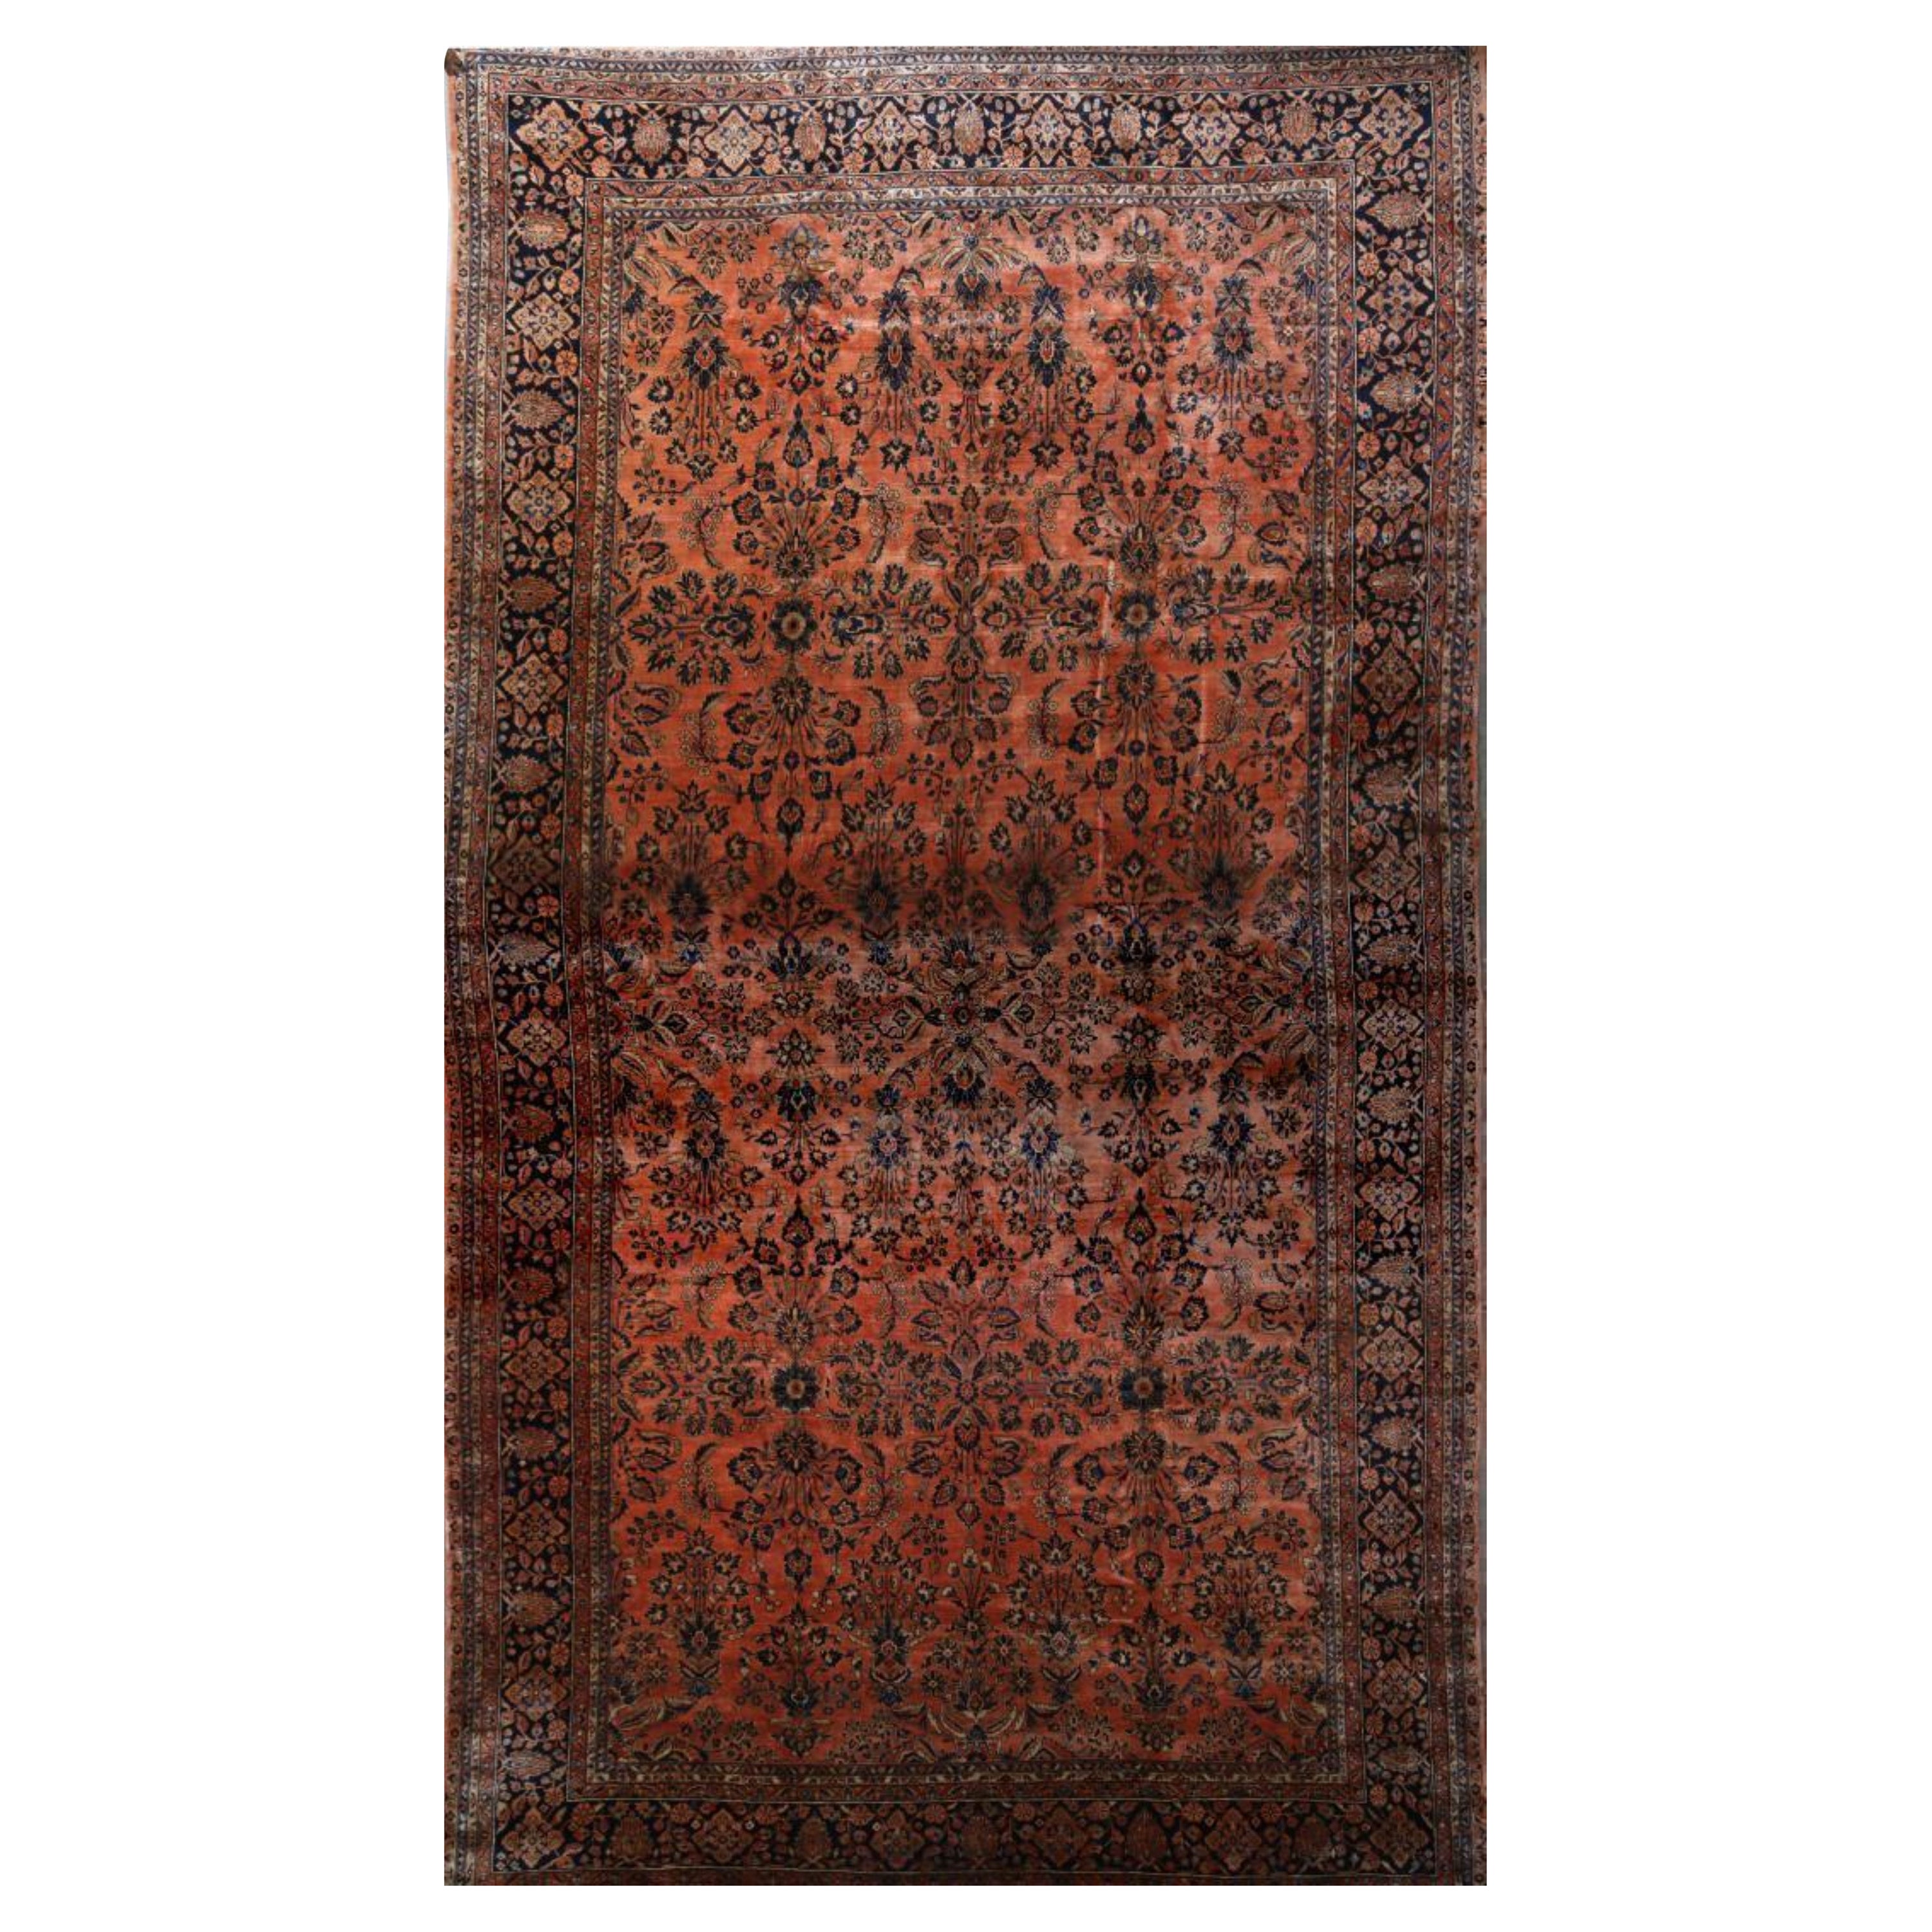 Hand-Knotted Antique Sarouk Persian Rug in Orange and Black Floral Pattern